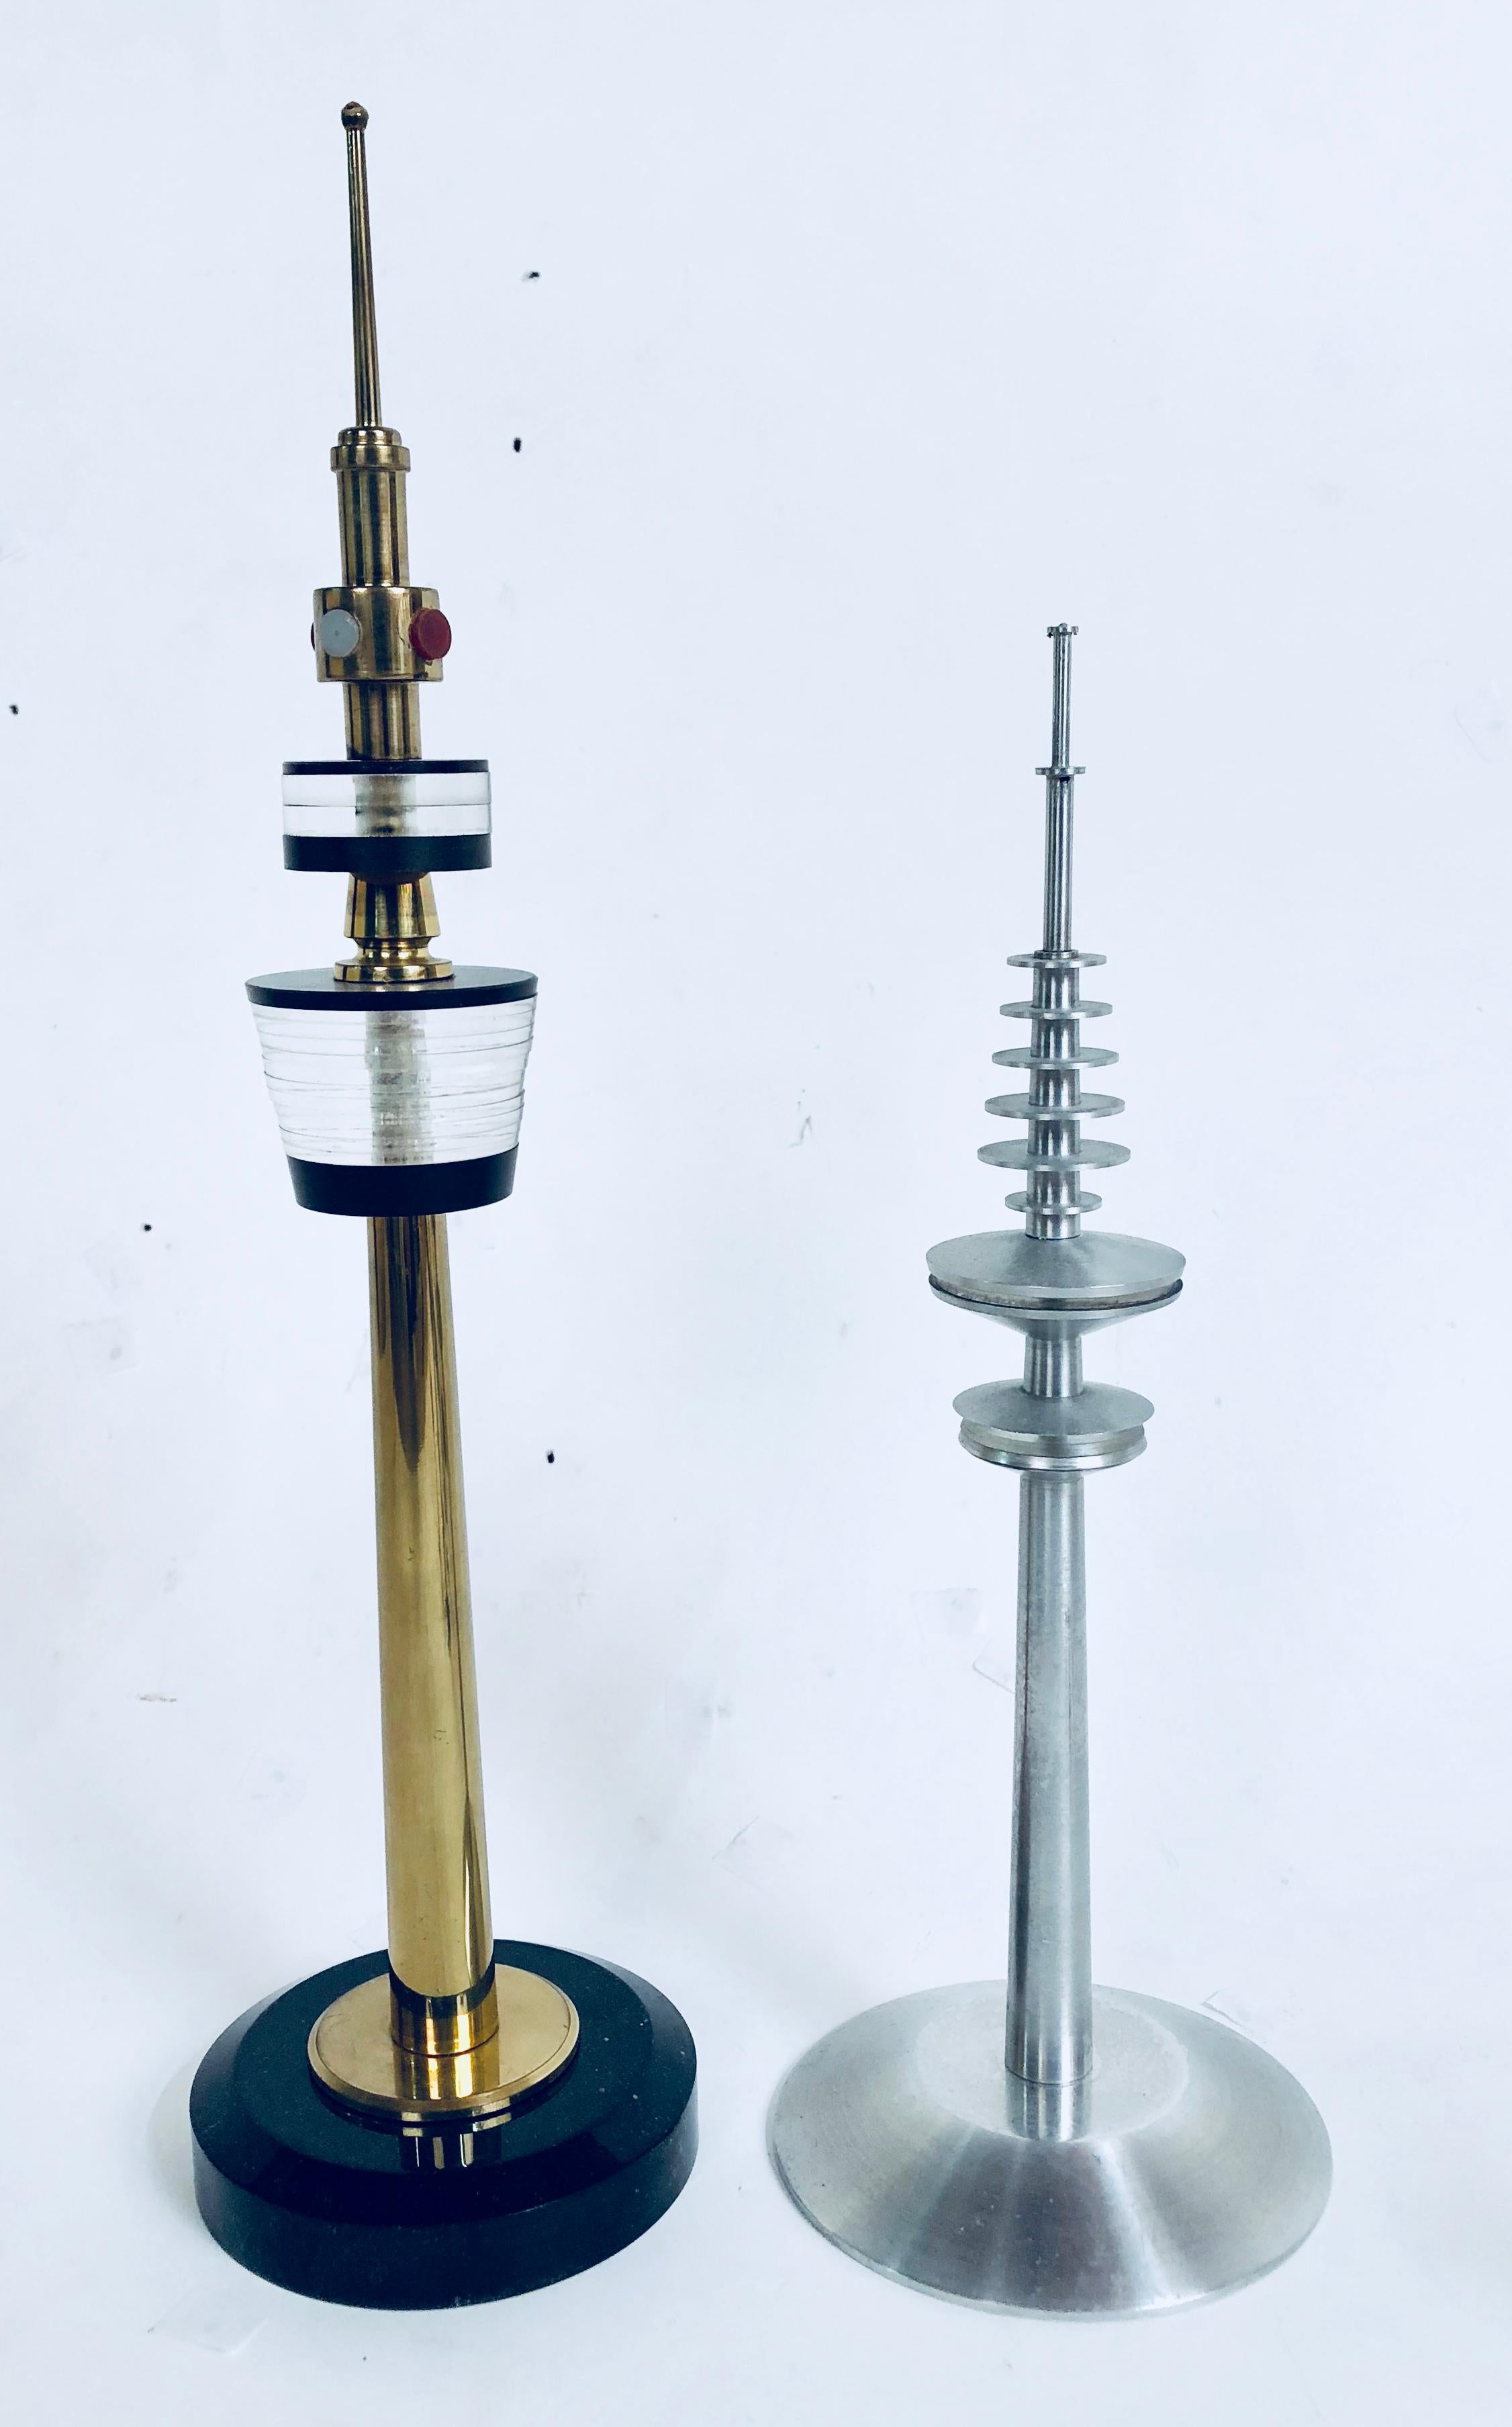 20th Century Collection Vintage Space Age Looking TV Tower Models circa 1950-1970 from Europe